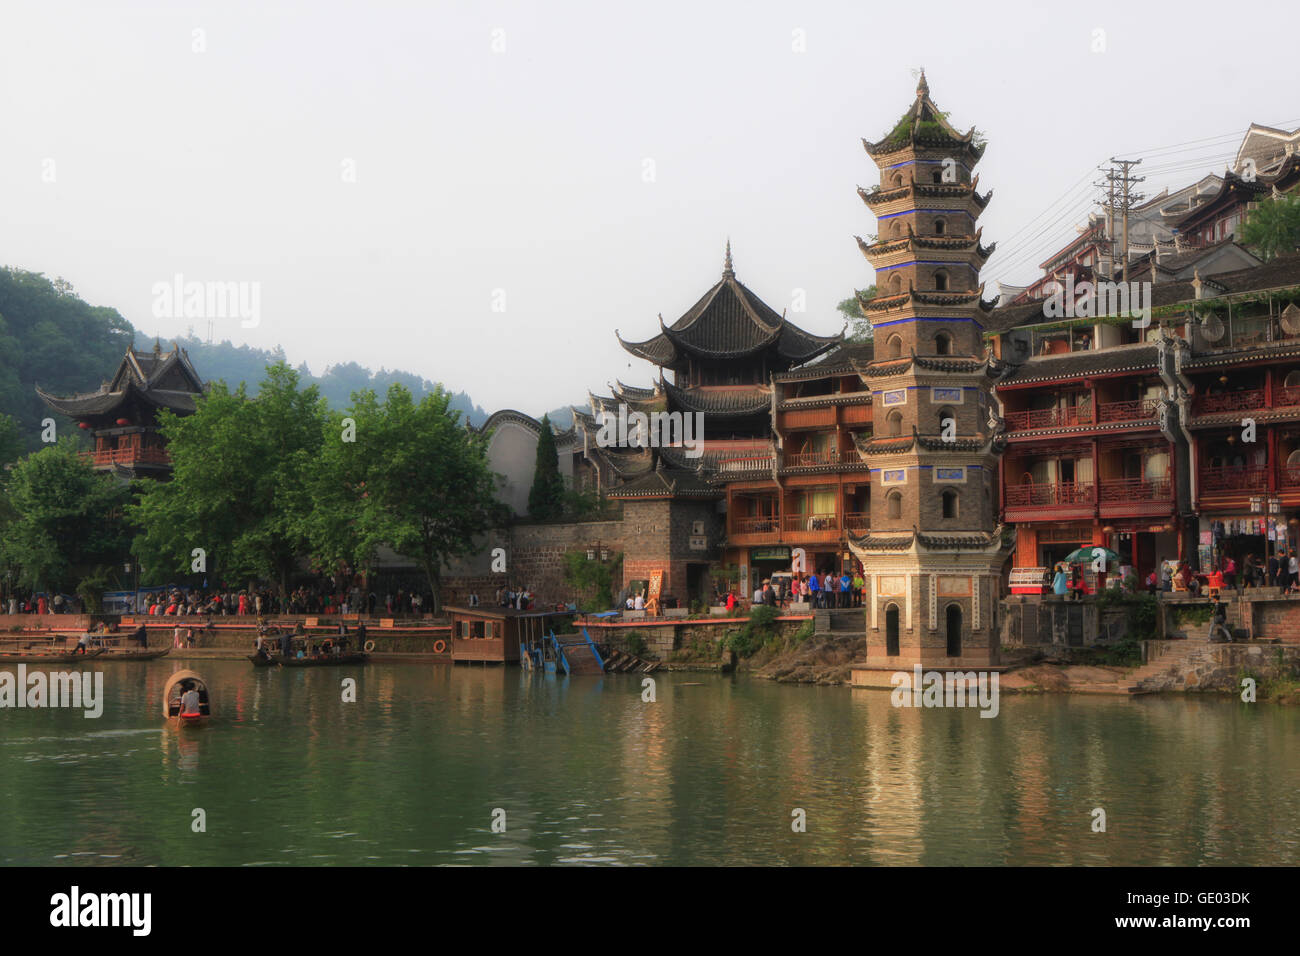 View of Fenghuang old castle, Hunan, China Stock Photo